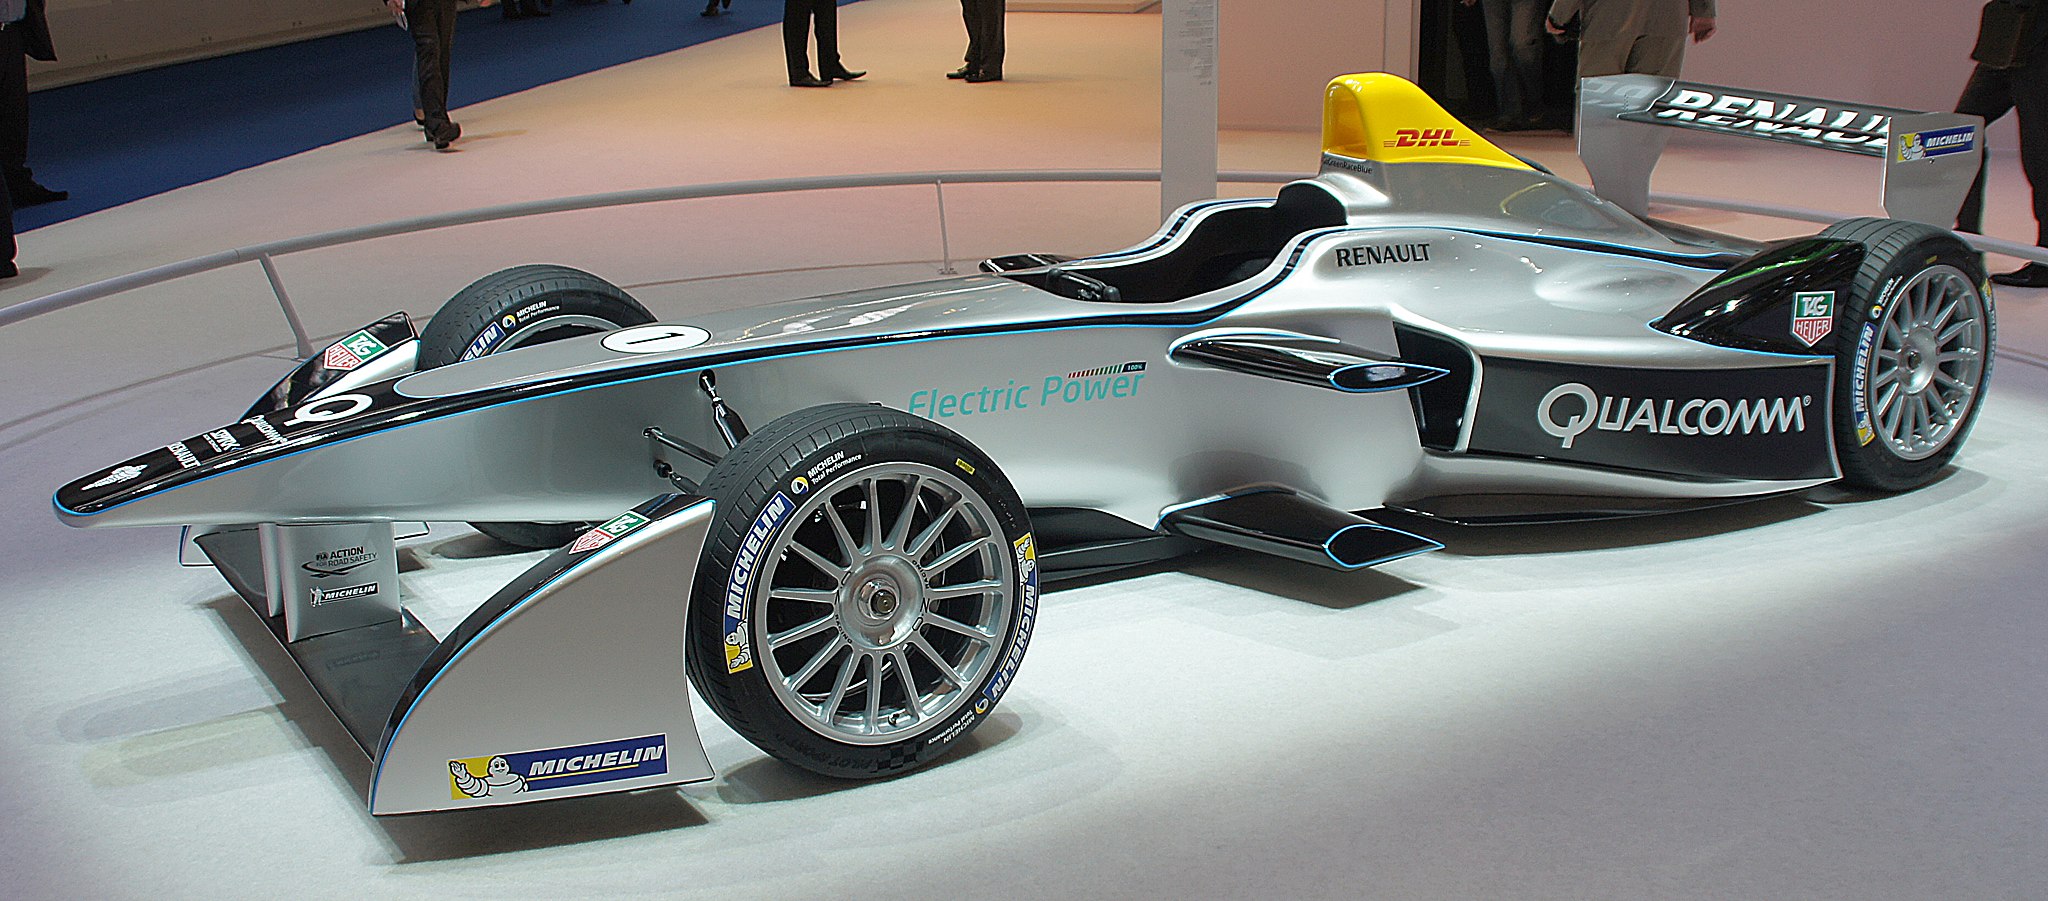 Quiet race cars? Yes! “Formula E racing” is a hot new world sport